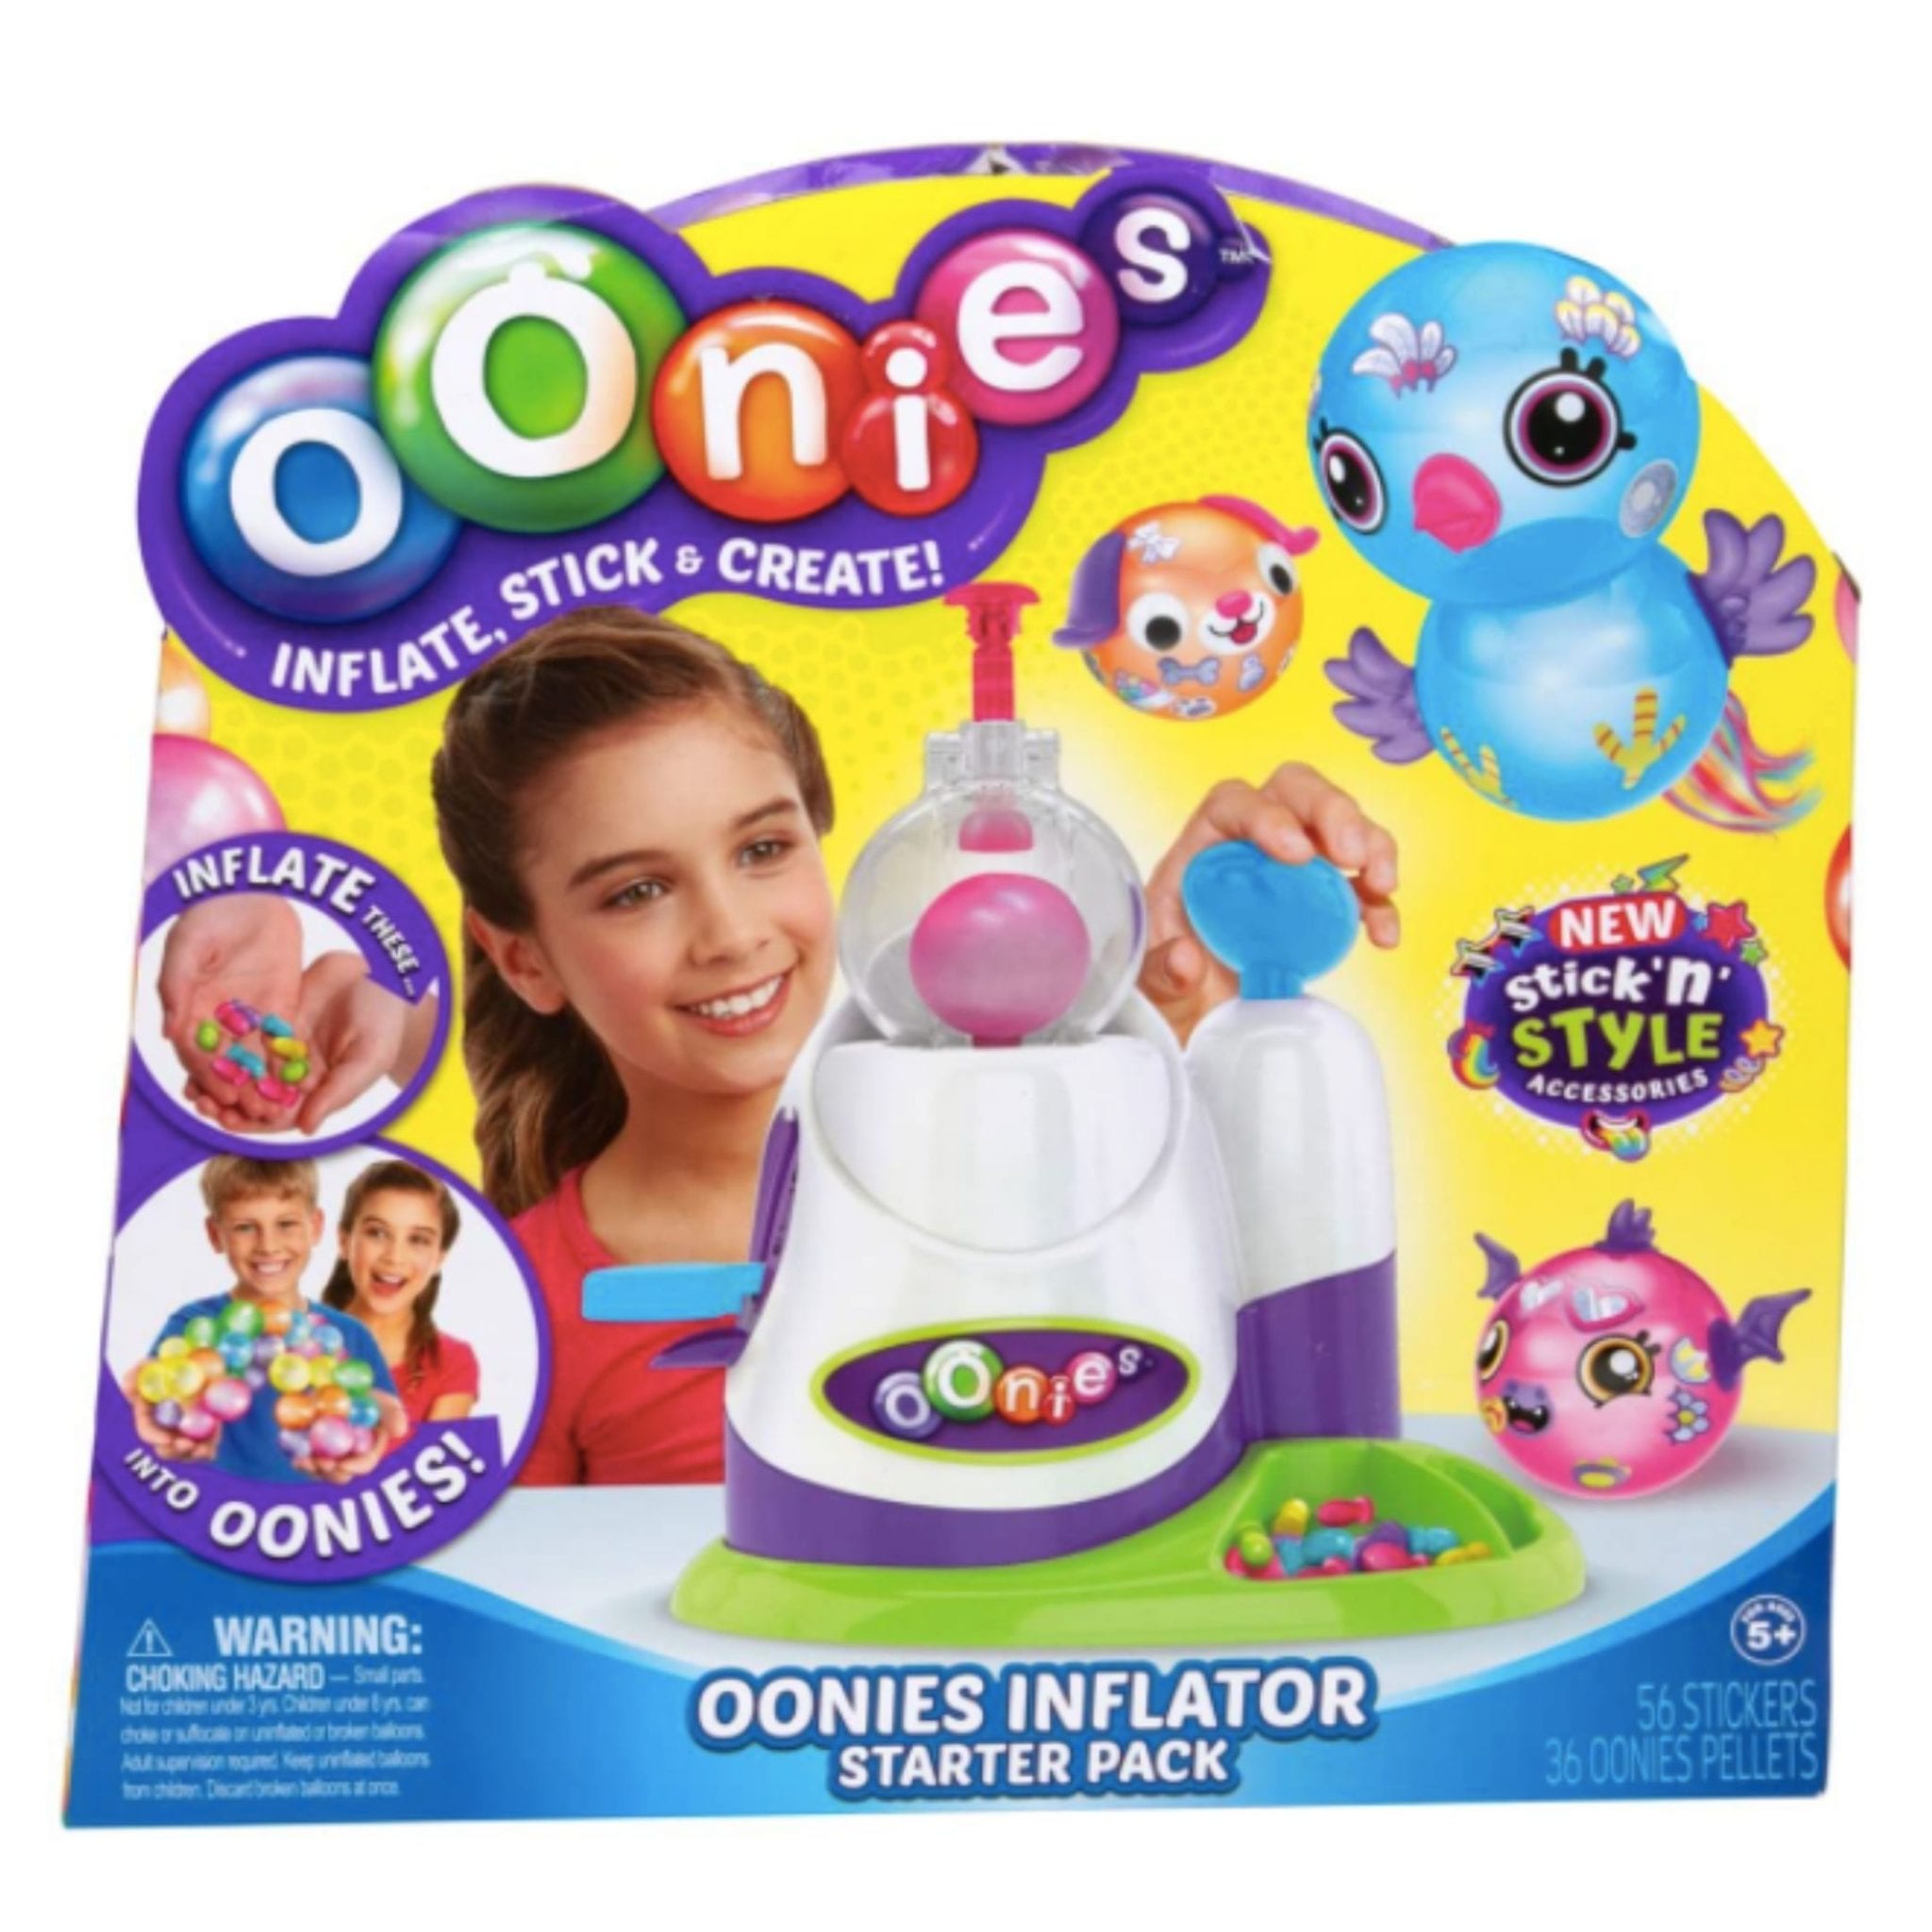 Oonies Inflator Starter Pack with Stick 'n' Style Accessories